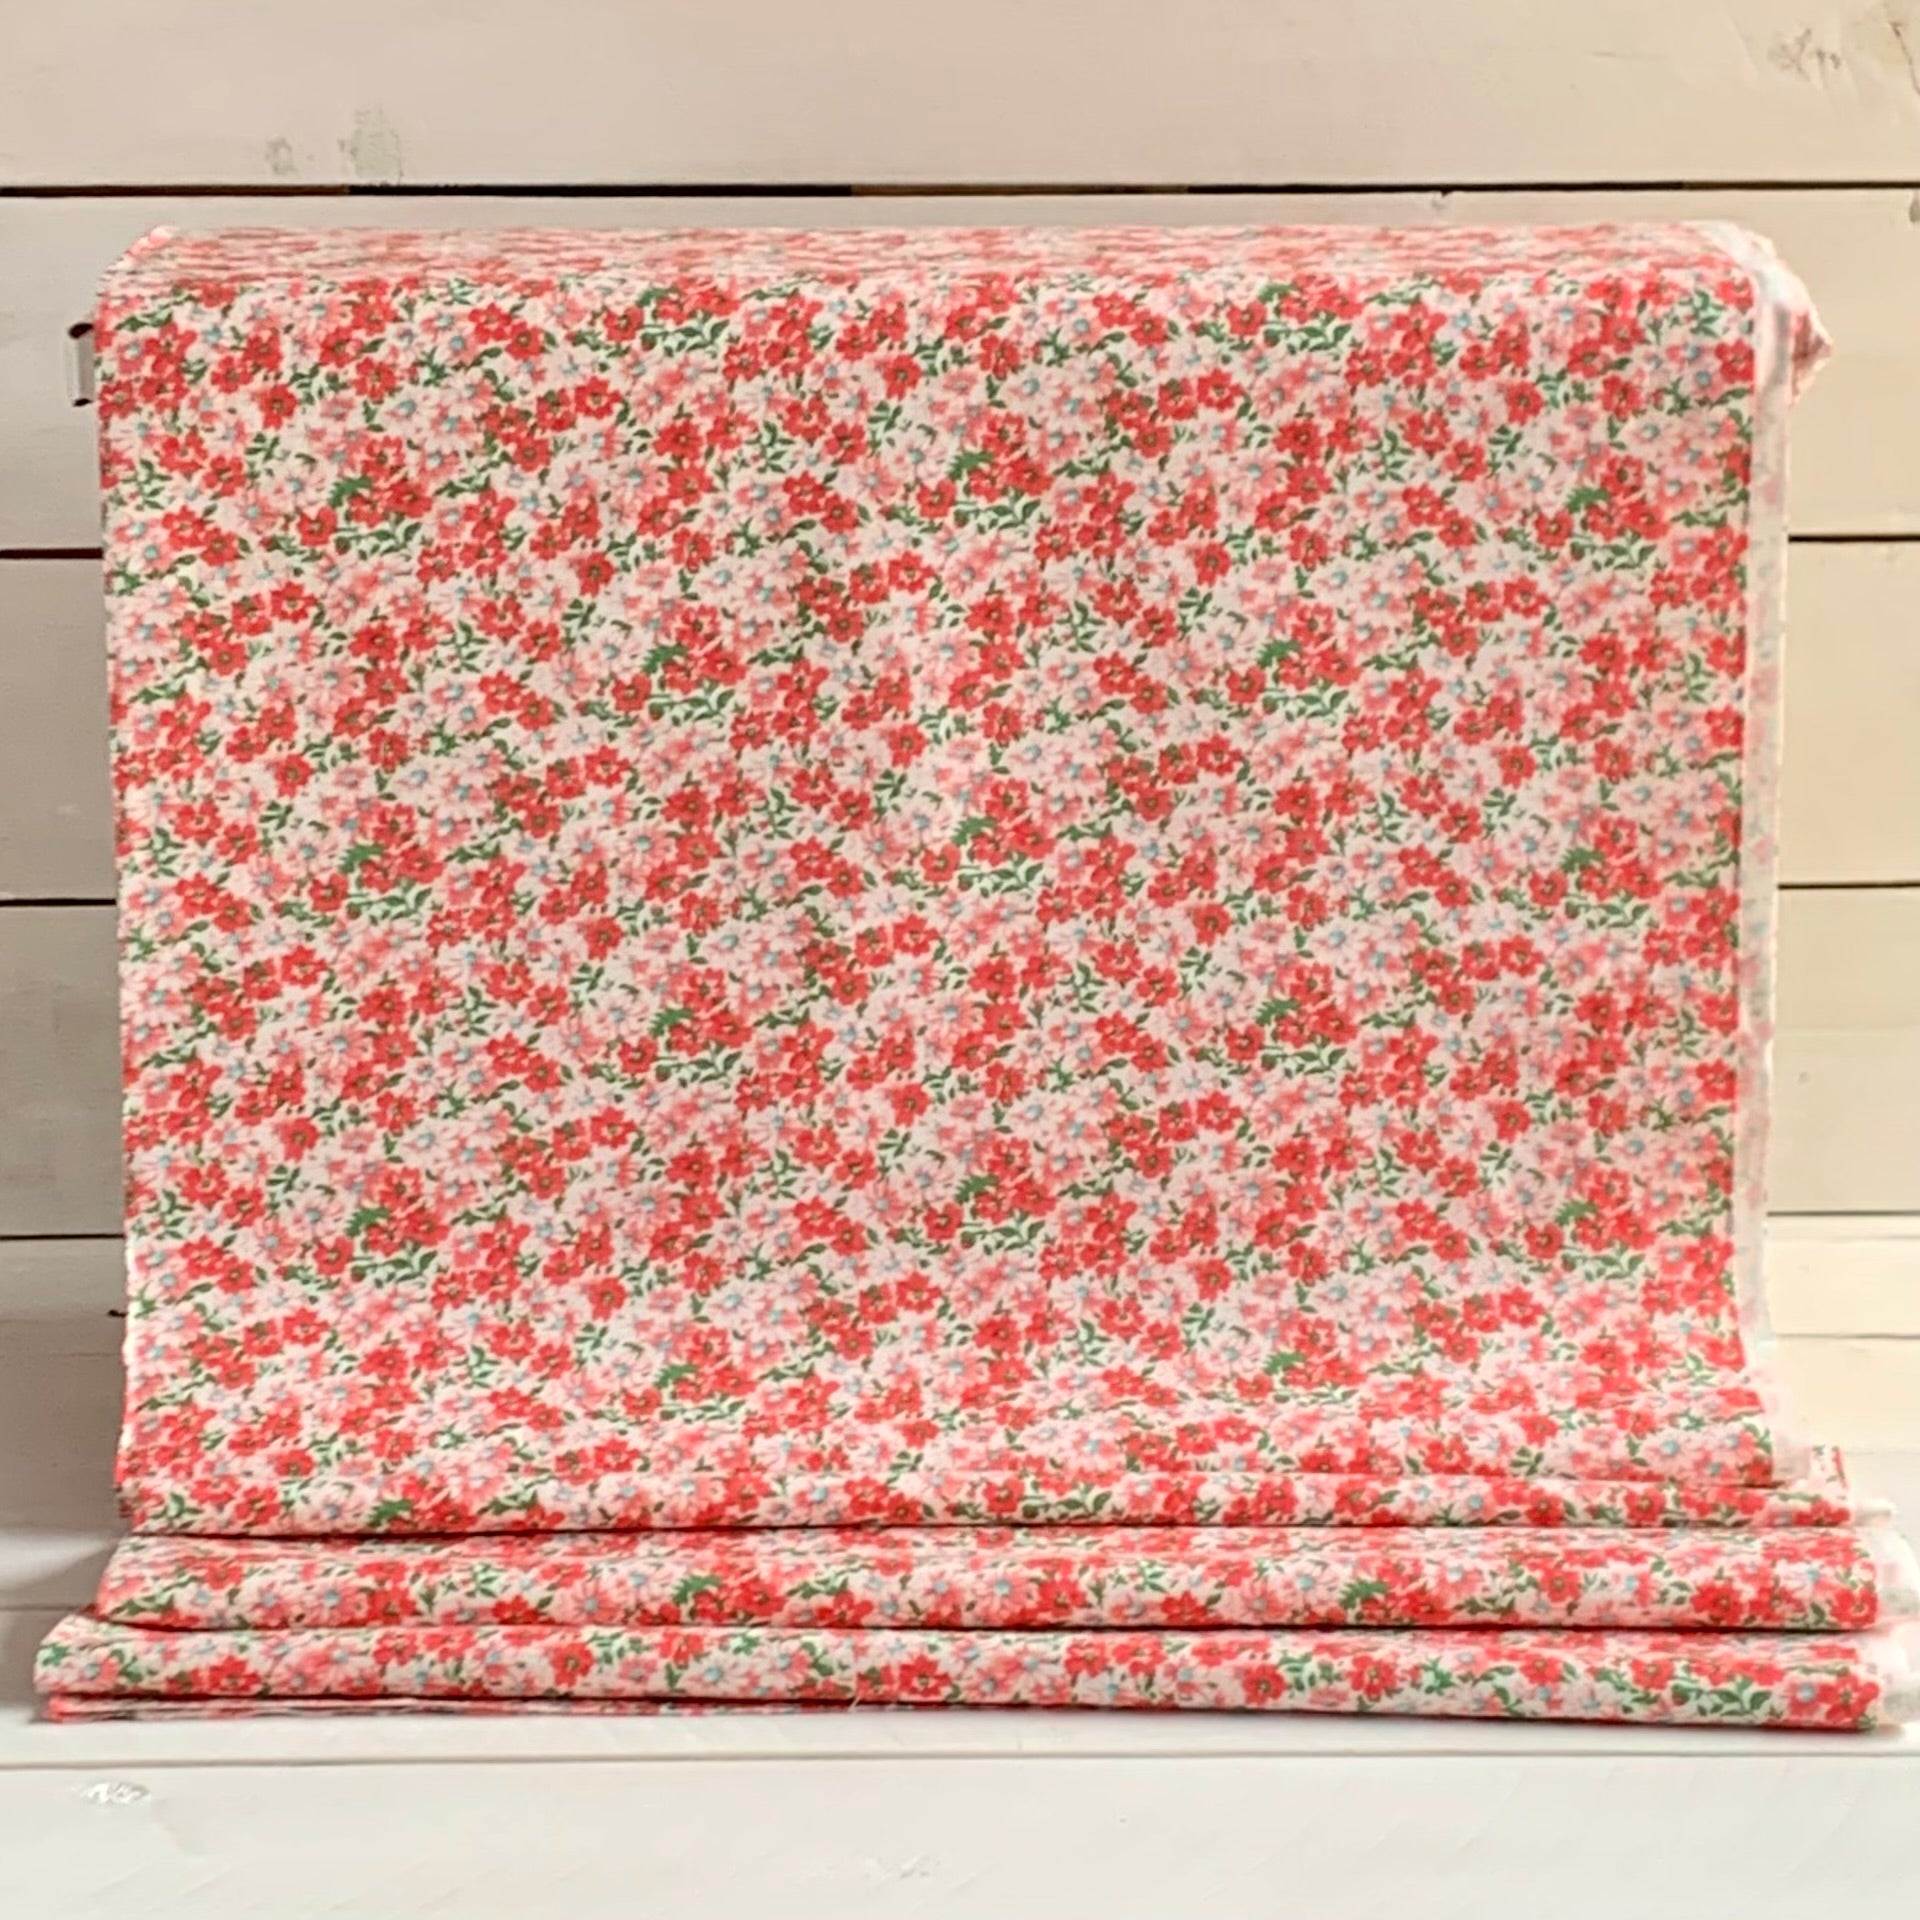 Reproduction Feed Sack Floral Fabric - Pink